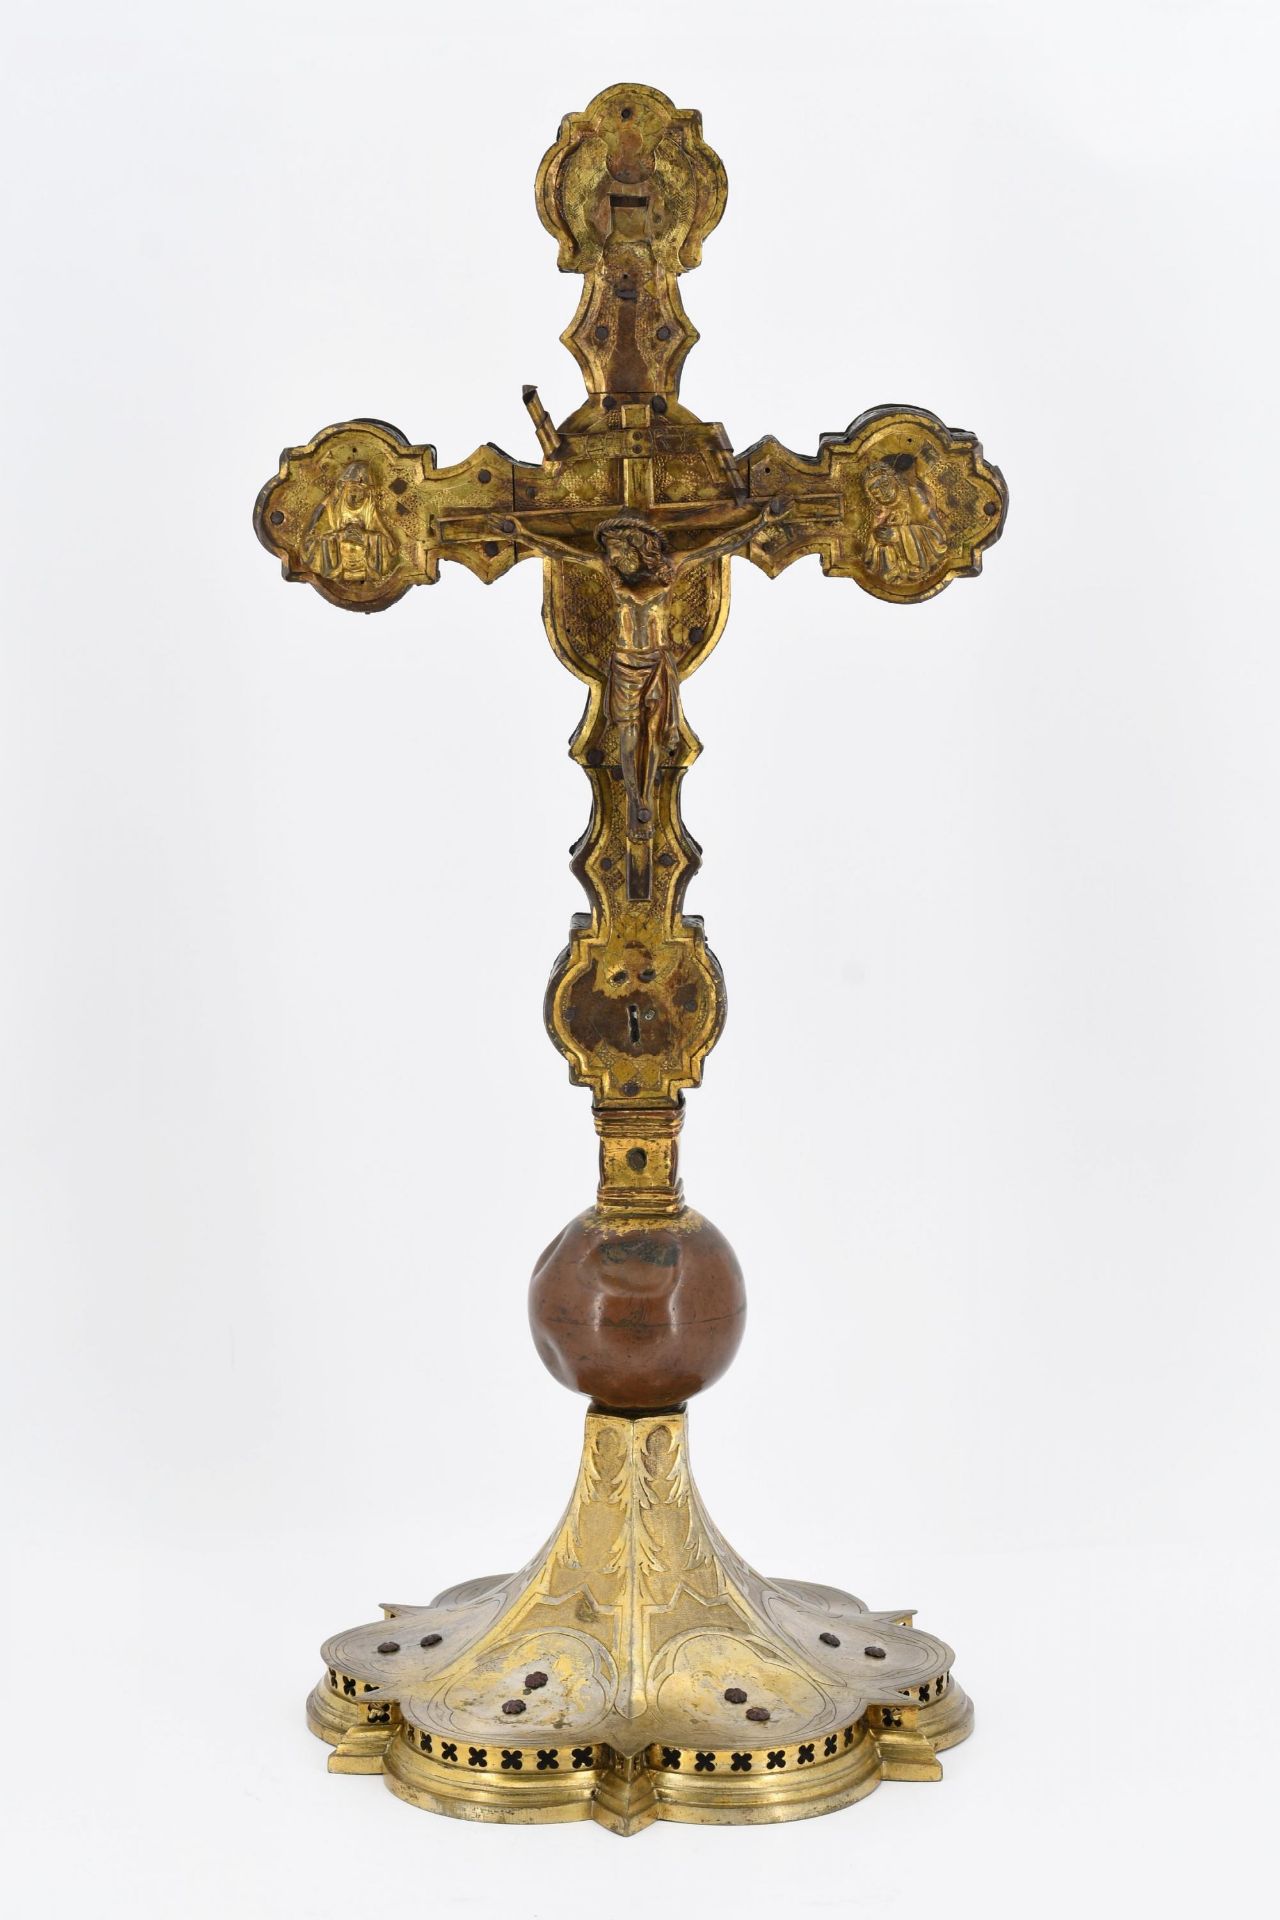 Gothic lecture cross made of wood and copper - Image 2 of 6